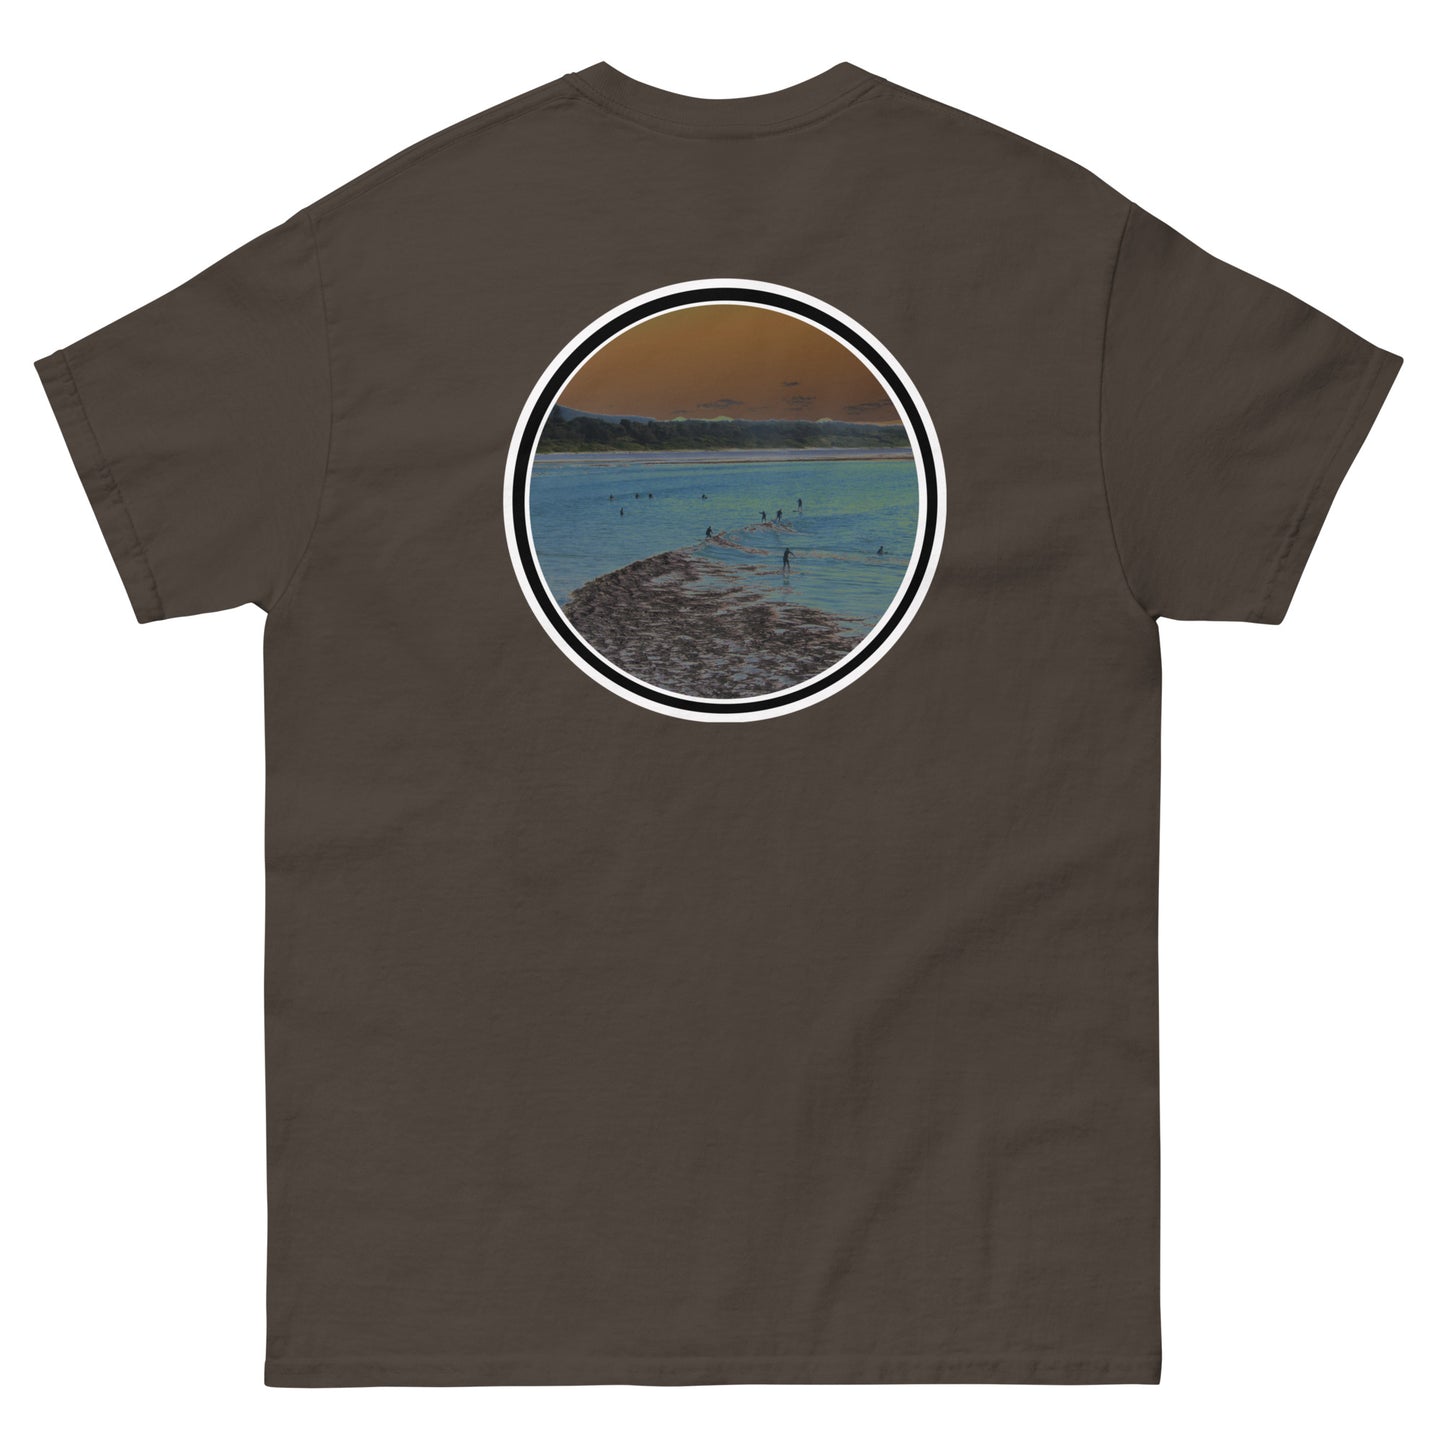 Stand-Up Paddle Board All Genders Tee